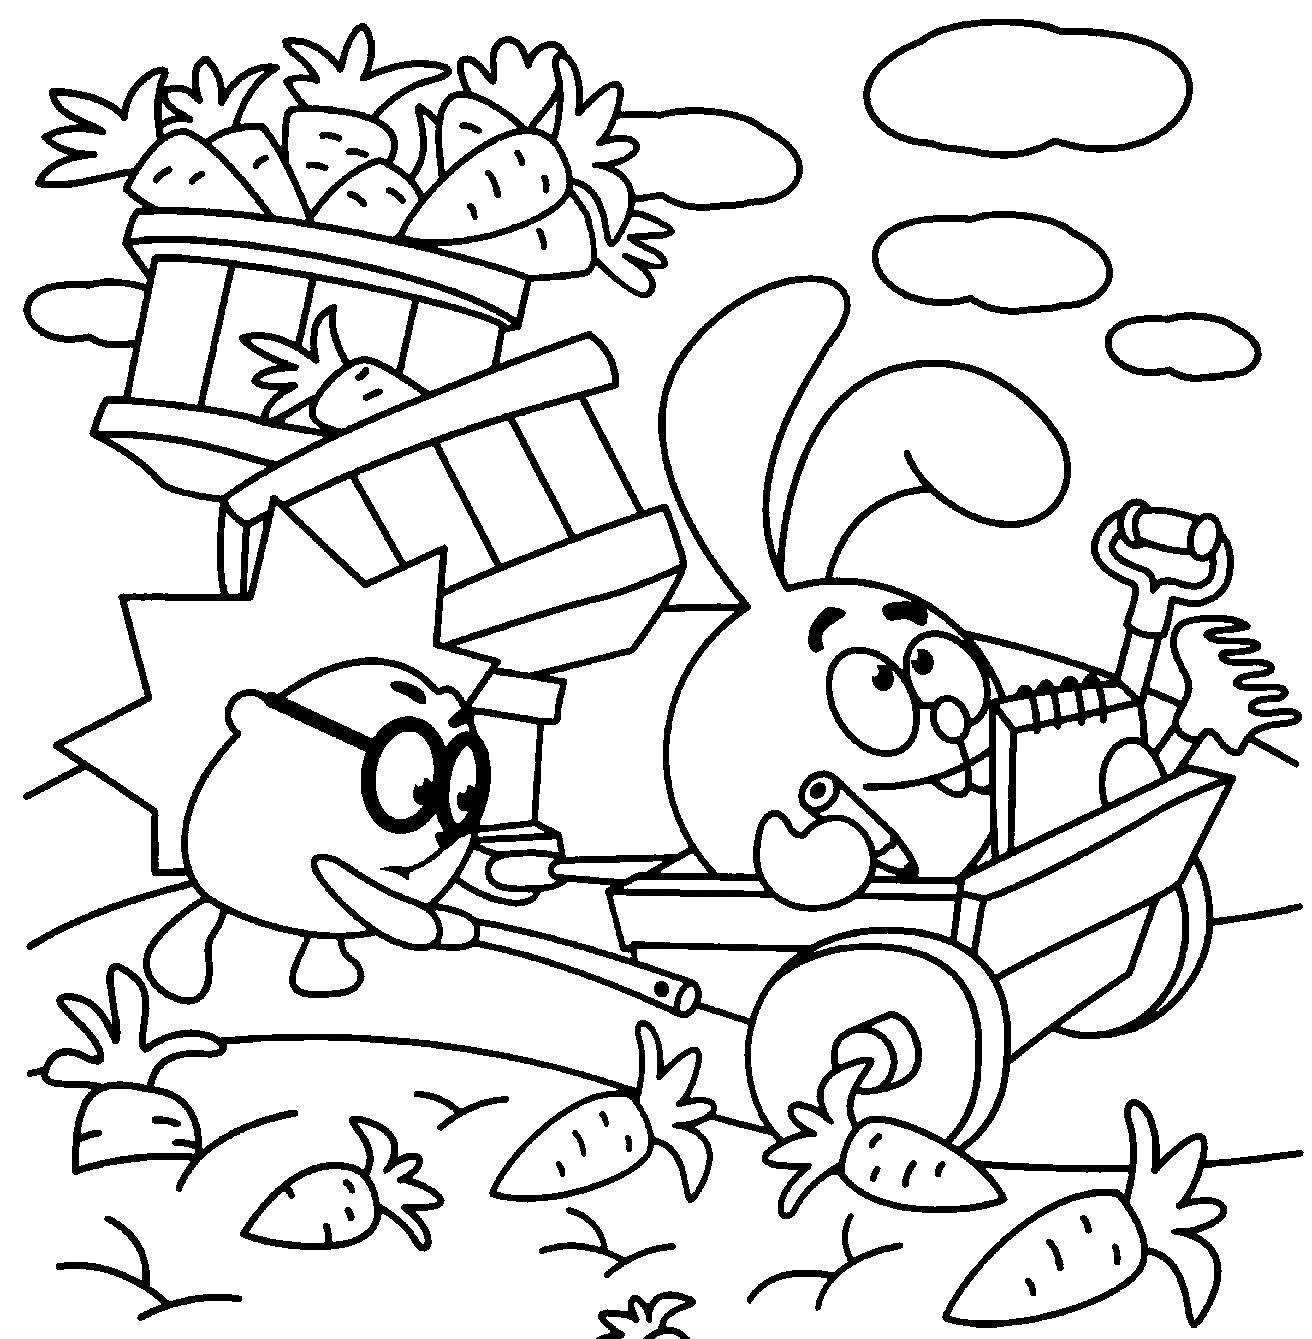 Coloring Croche and hedgehog collect the harvest. Category Smeshariki . Tags:  Smeshariki croche.